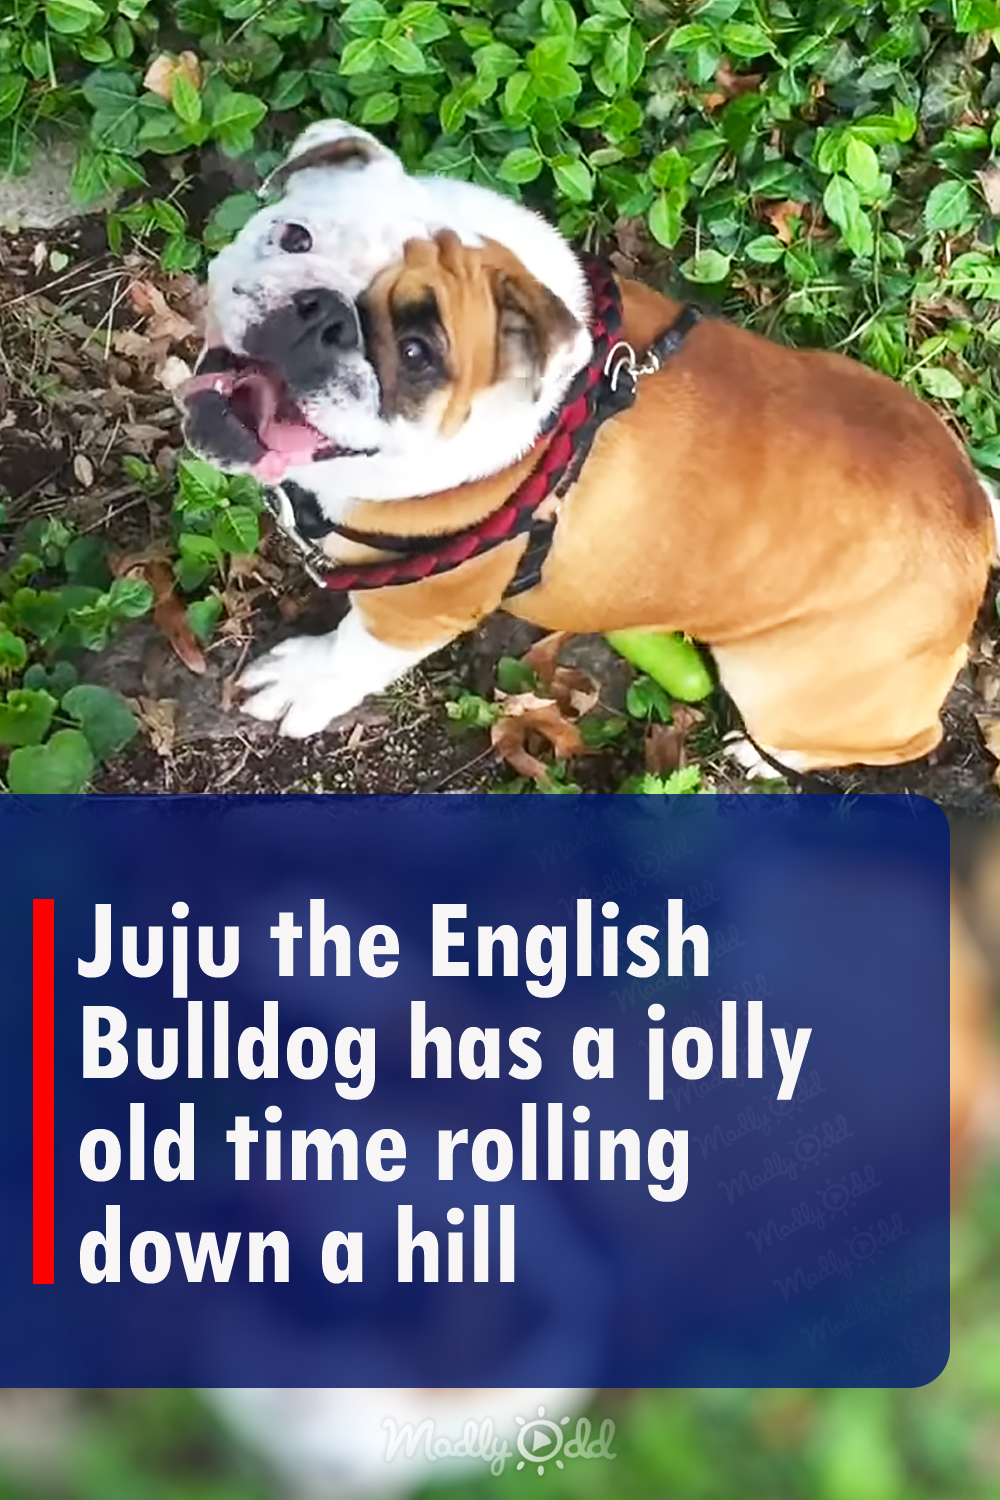 Juju the English Bulldog has a jolly old time rolling down a hill